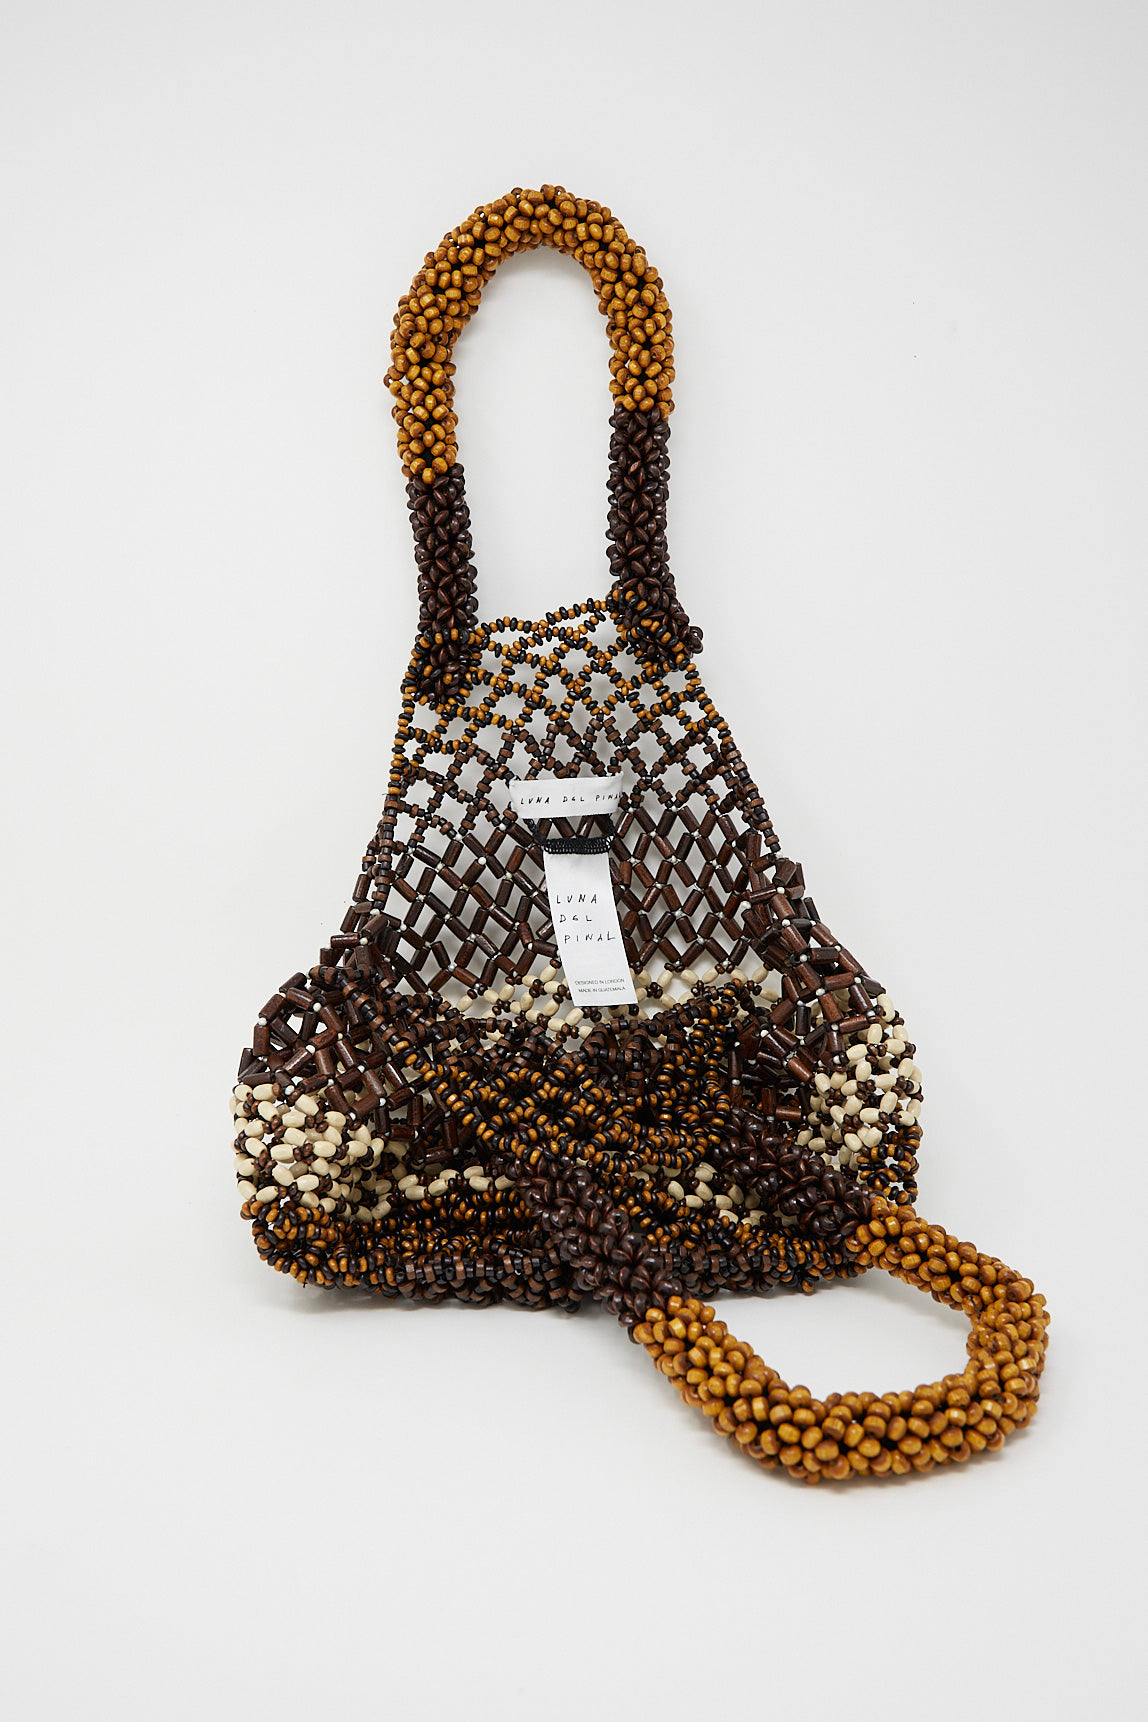 A Medium Wooden Beaded Bag in Bone Brown by Luna Del Pinal adorned with wooden beads on a white surface.